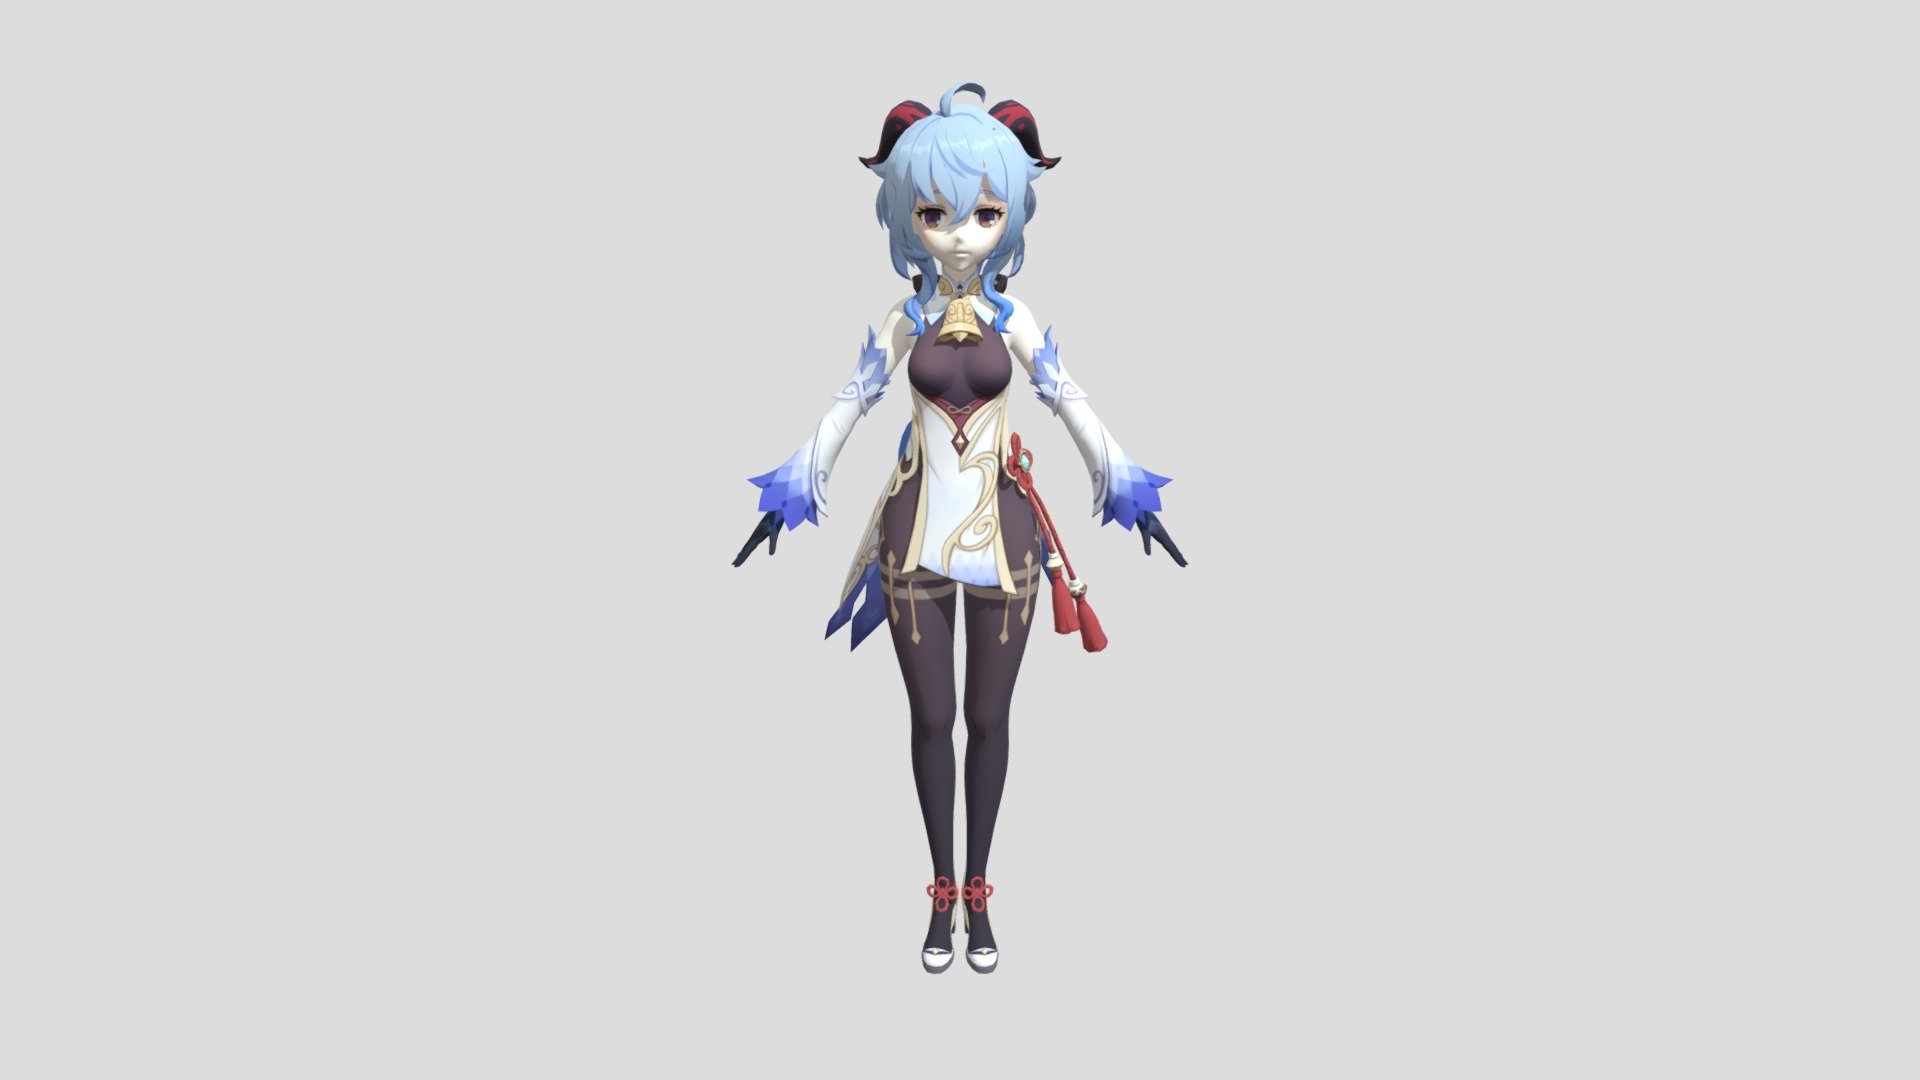 posible bug: textures not applying in blender. work around: idfk :) my discord is &lt;3UwU&lt;3#3284 just incase lol
NOT MADE BY ME - Ganyu fbx with textures - Download Free 3D model by _INSTICT_ 3d model